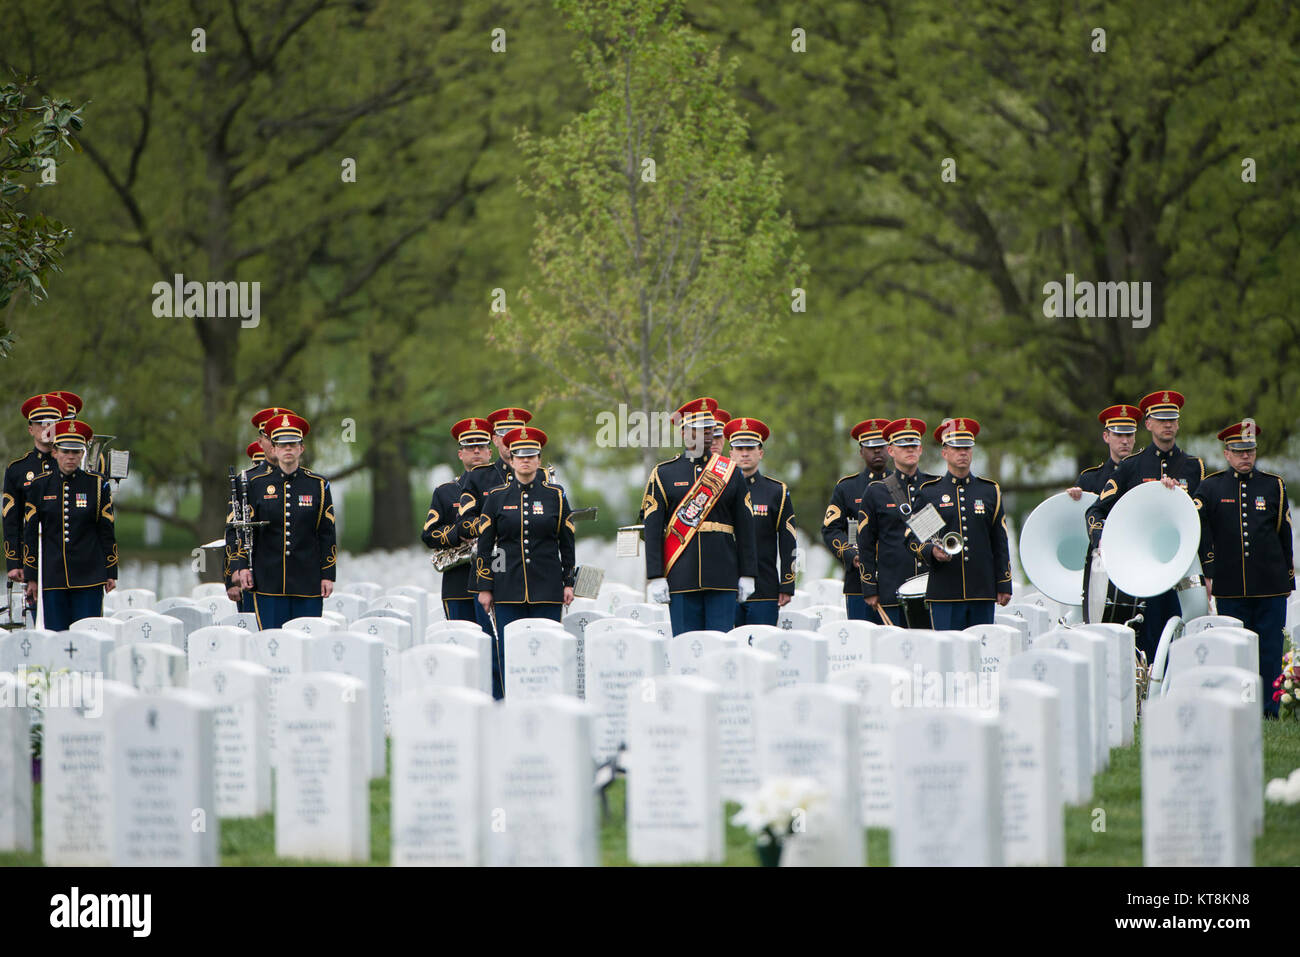 Members of the U.S. Army Band, “Pershing’s Own,” participate in the graveside service for U.S. Army Air Forces 2nd Lt. Marvin B. Rothman, 21, of Cleveland Heights, Ohio, at Arlington National Cemetery, April 19, 2017, in Arlington, Va. Rothman went missing during a bombing escort mission, April 11, 1944, flying a P-47D Thunderbolt over New Guinea. His remains were recently found and identified. (U.S. Army photo by Rachel Larue/Arlington National Cemetery/released) Stock Photo